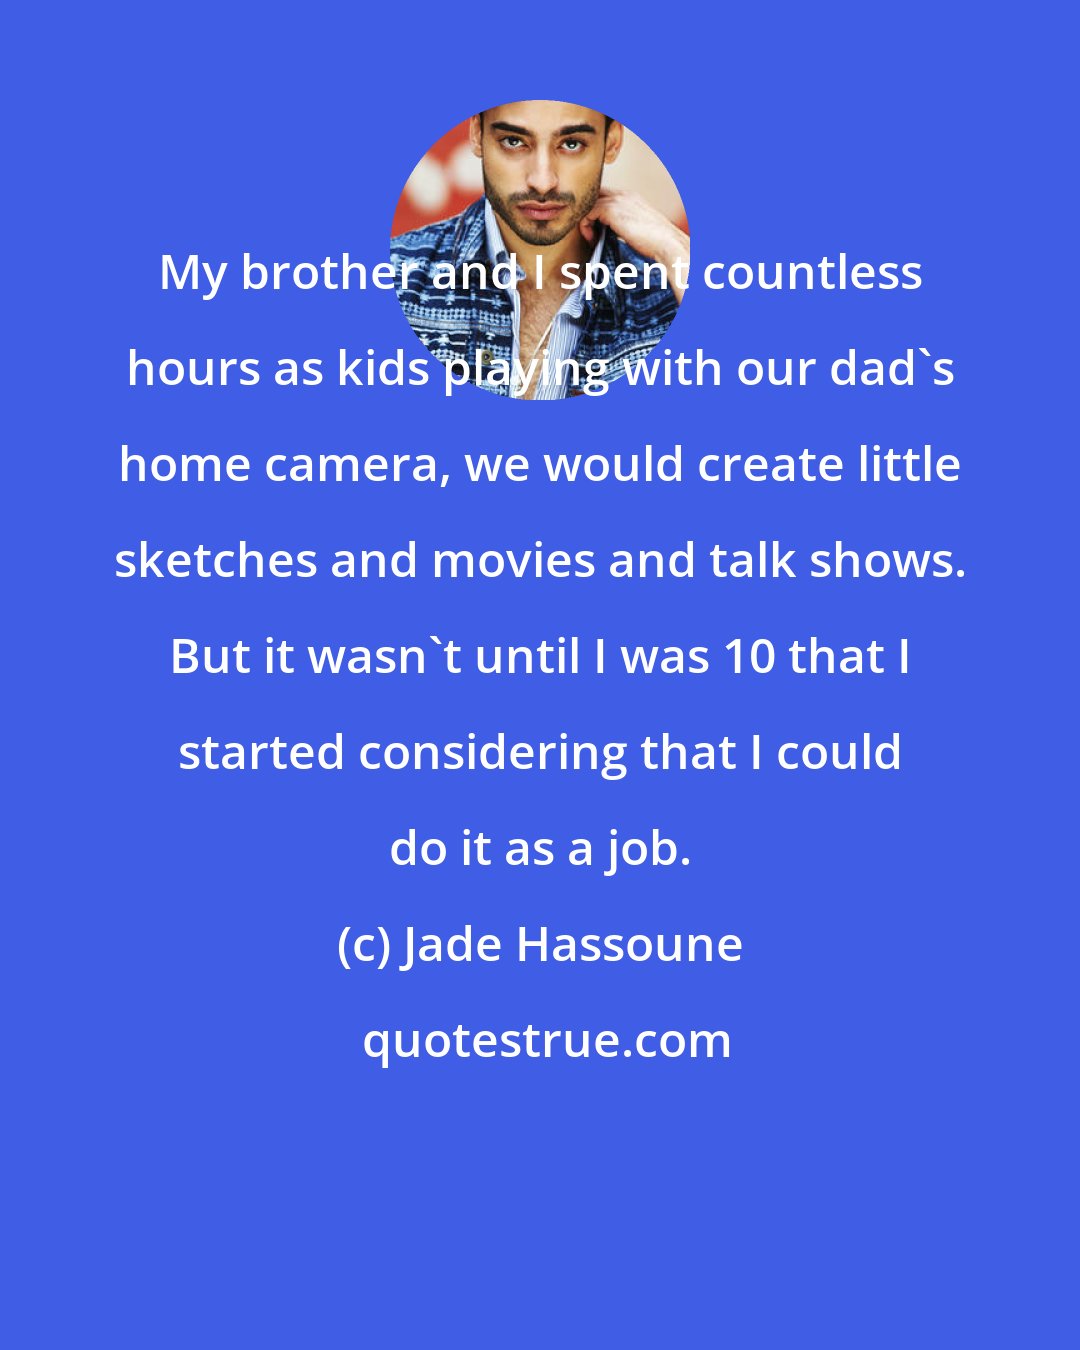 Jade Hassoune: My brother and I spent countless hours as kids playing with our dad's home camera, we would create little sketches and movies and talk shows. But it wasn't until I was 10 that I started considering that I could do it as a job.